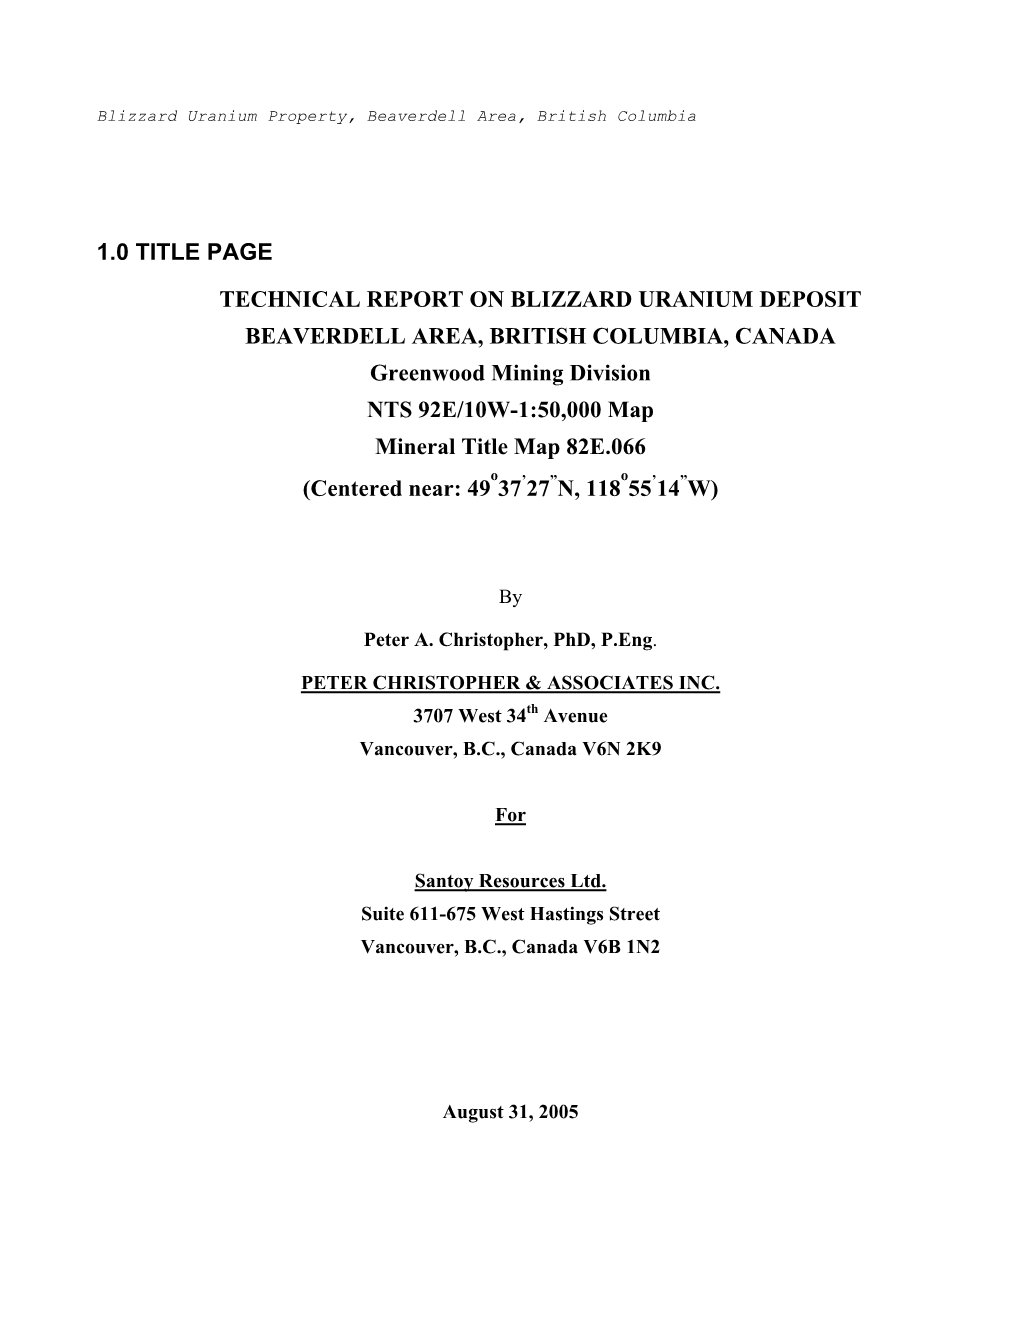 1.0 Title Page Technical Report on Blizzard Uranium